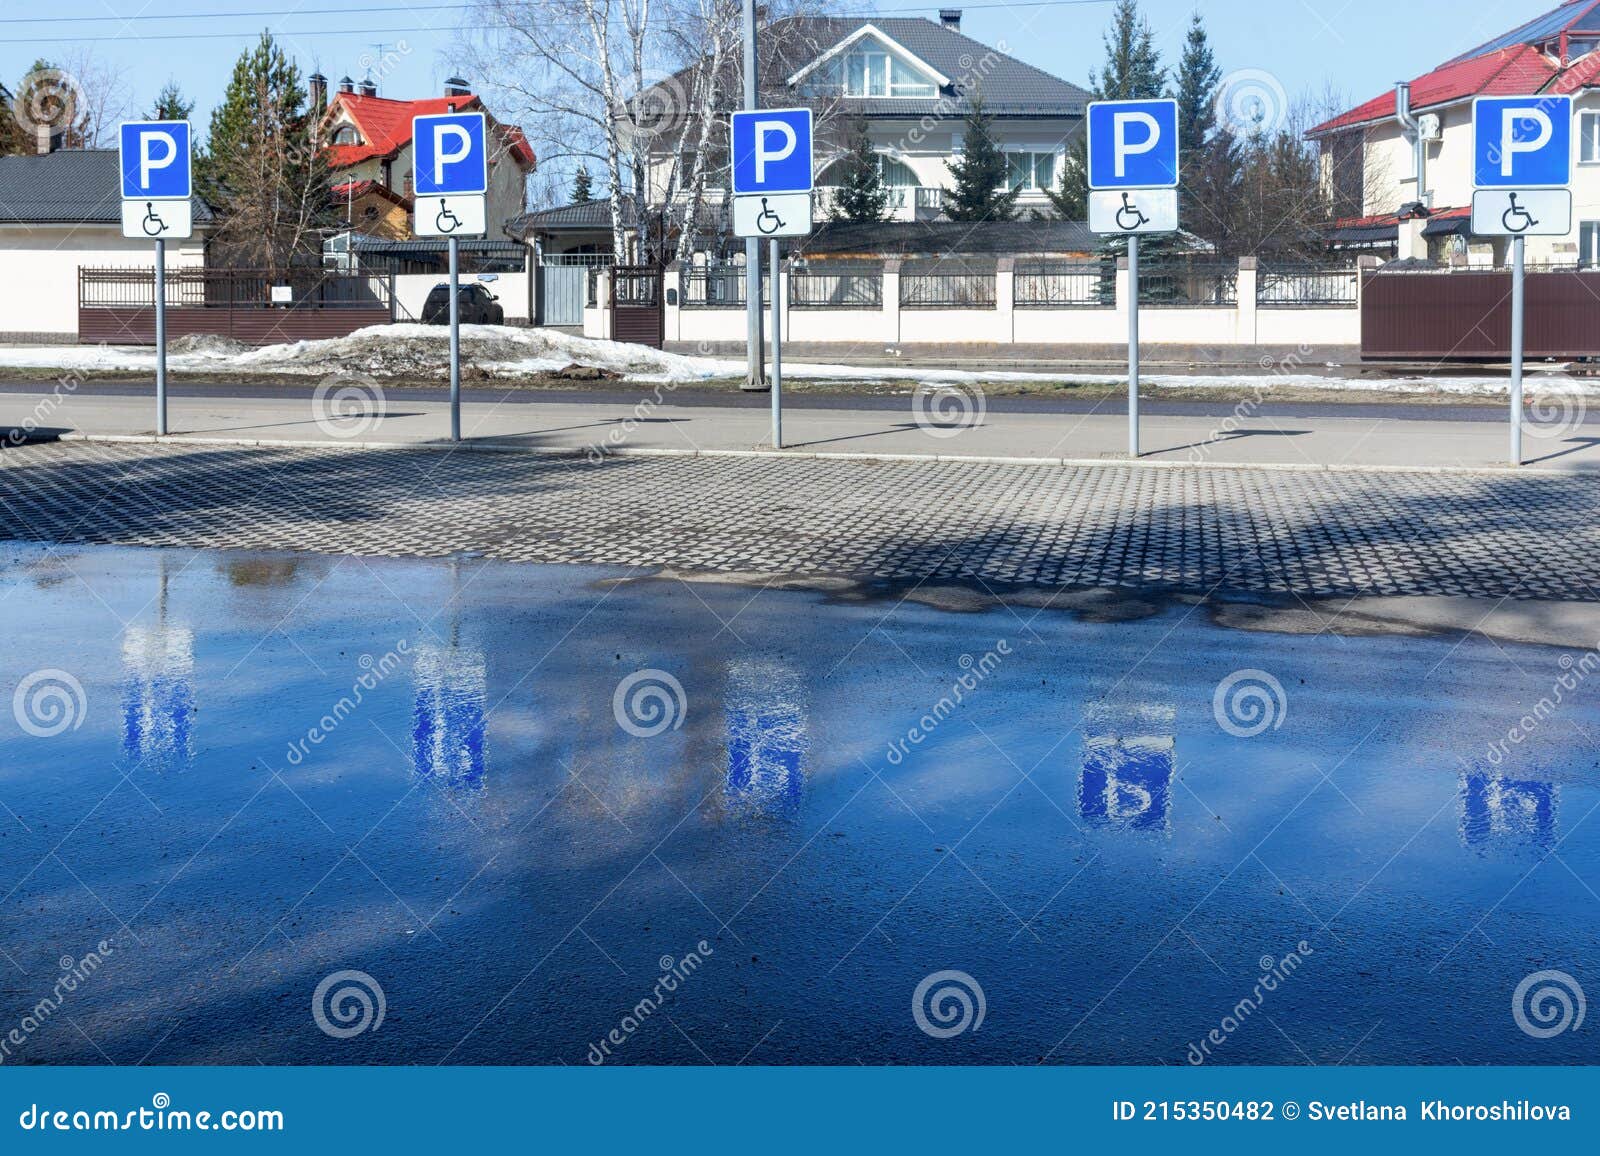 Krasnoyarsk, Russia - March 06, 2021: Four Disabled Parking Spaces In